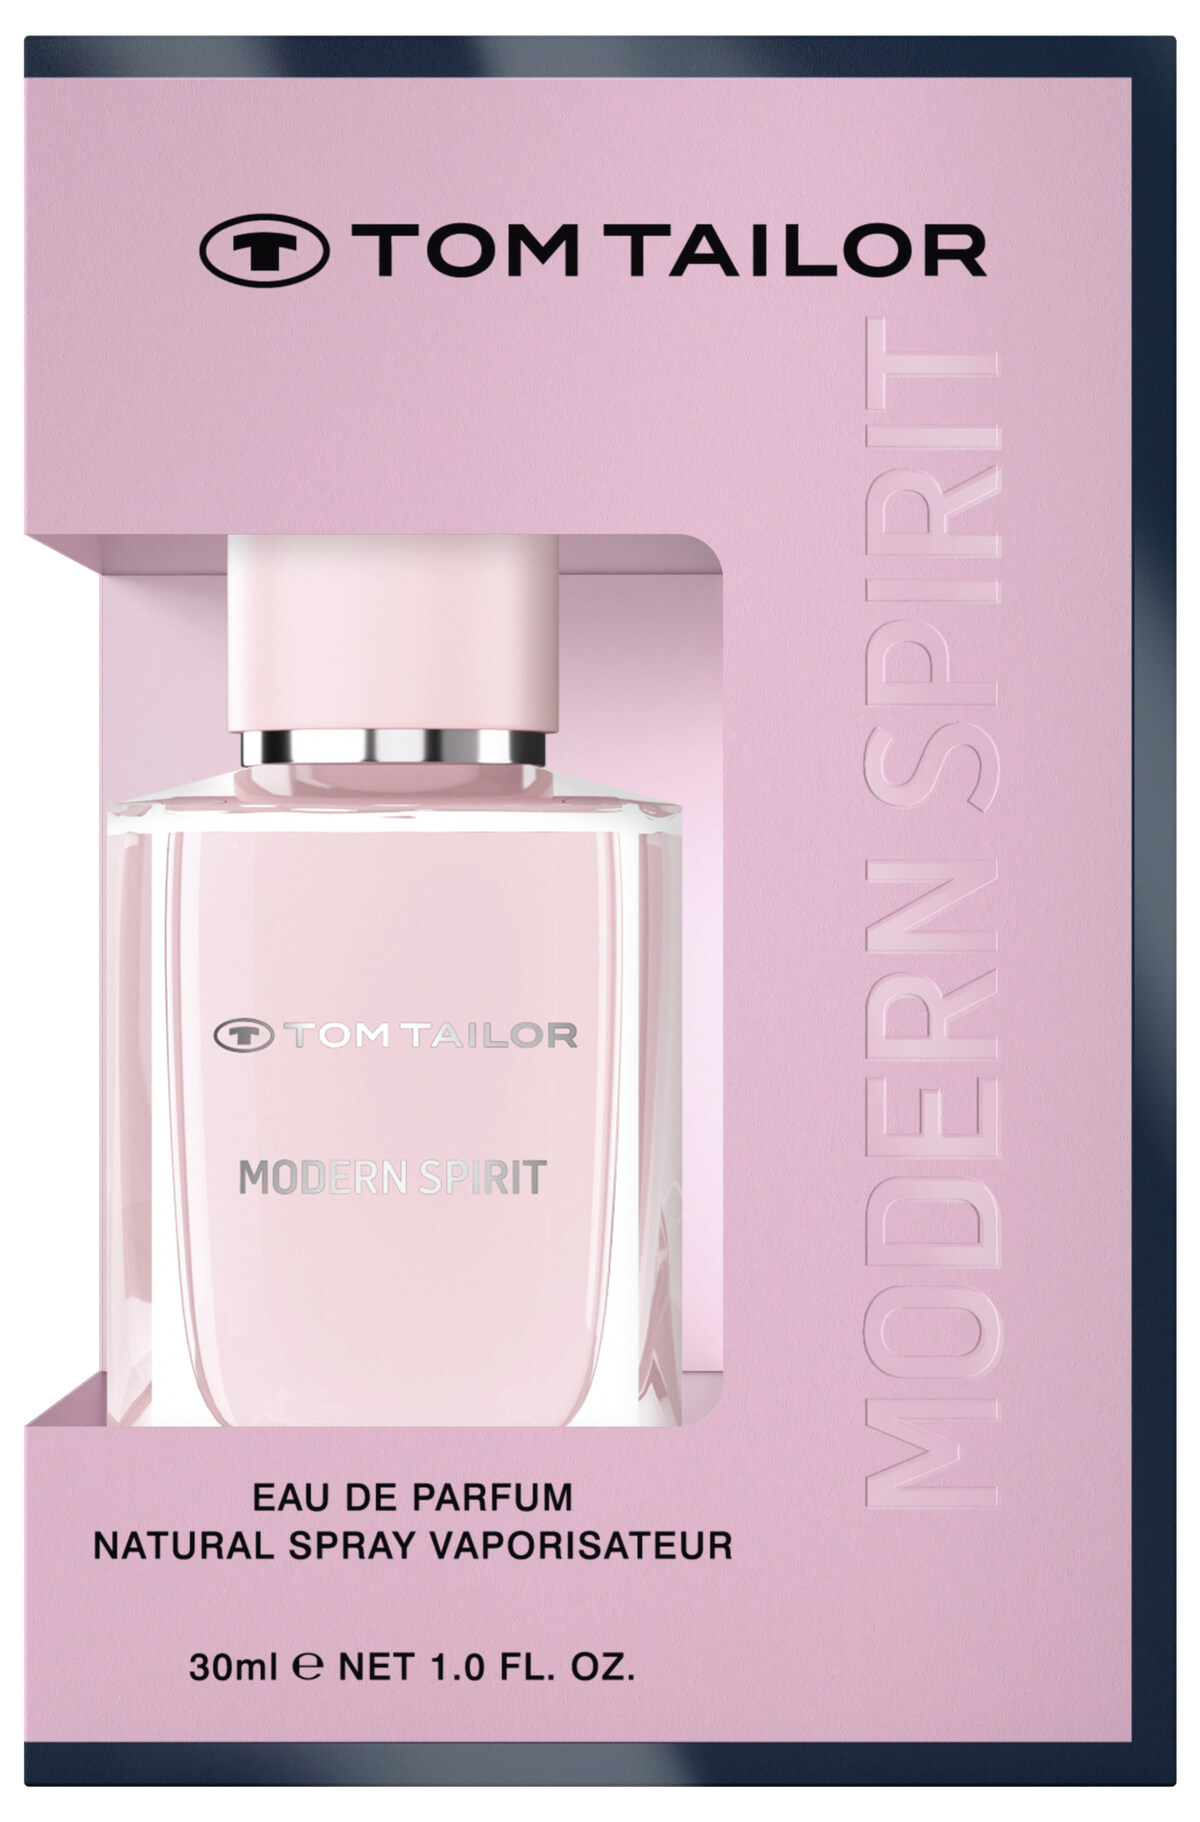 Modern Spirit by Tom Tailor » Reviews & Perfume Facts